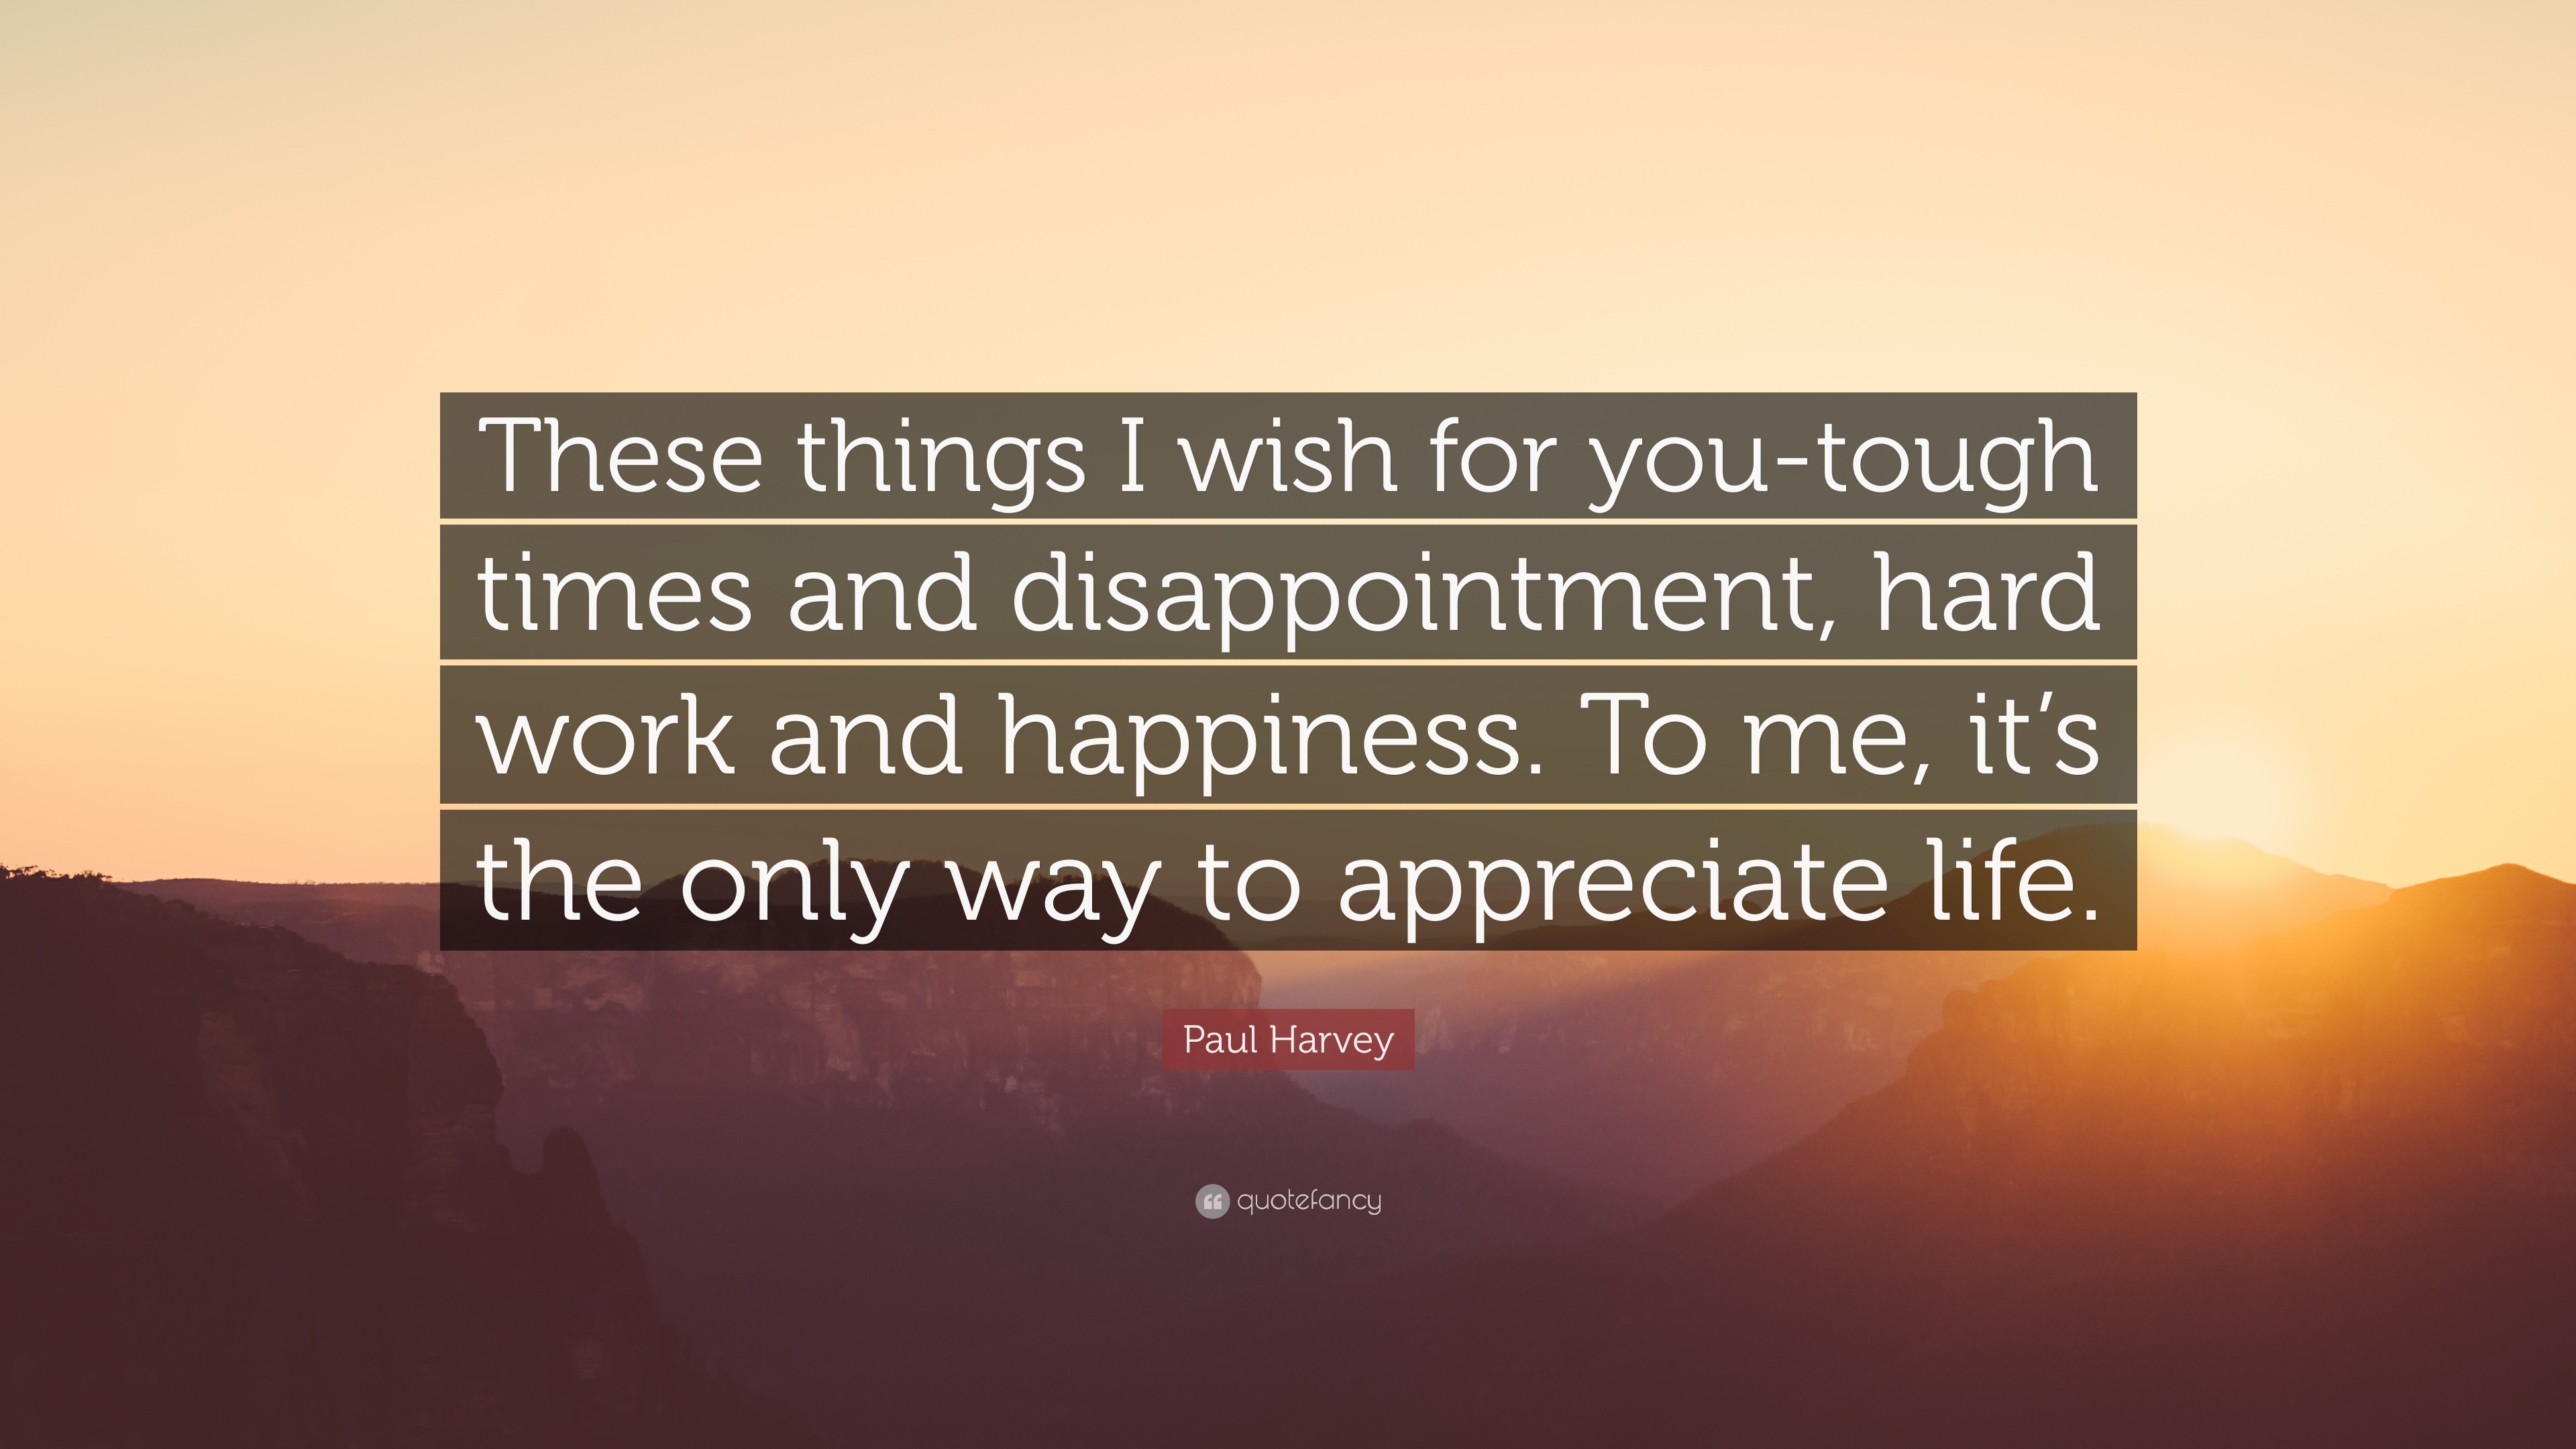 Paul Harvey Quote “These things I wish for you tough times and disappointment